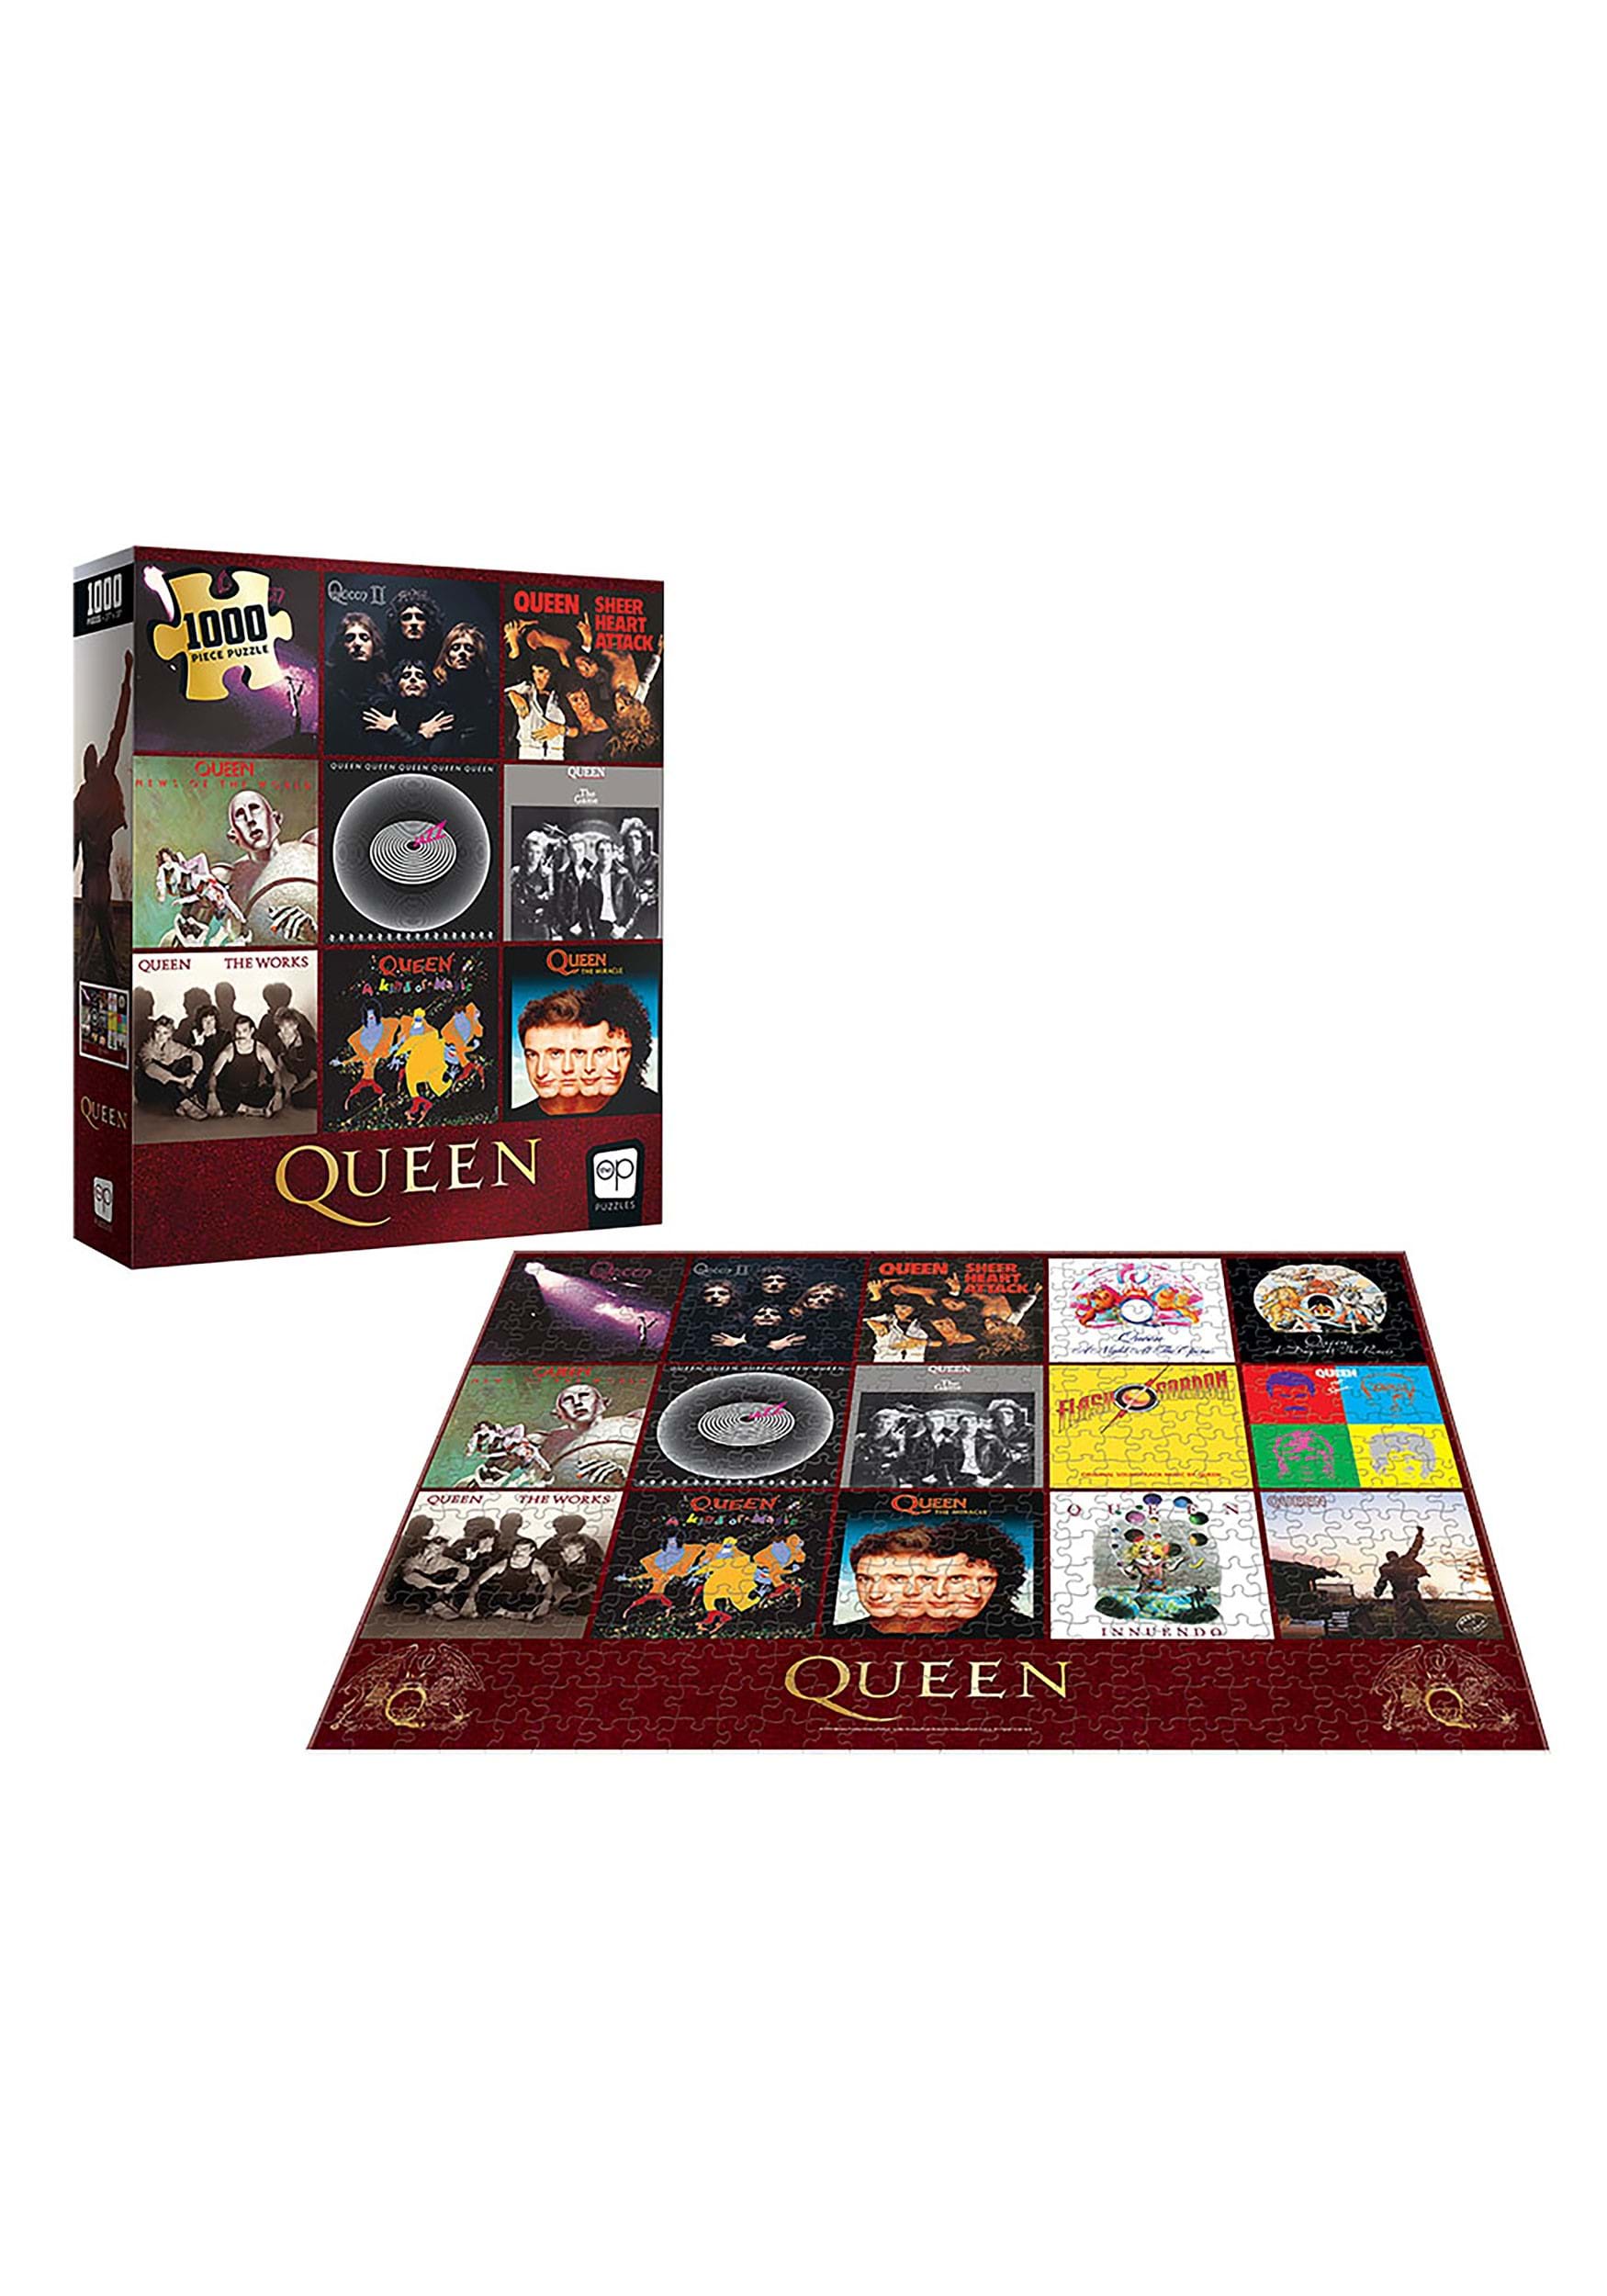 1000 Piece Queen Album Covers Puzzle | Bands and Artists Gifts